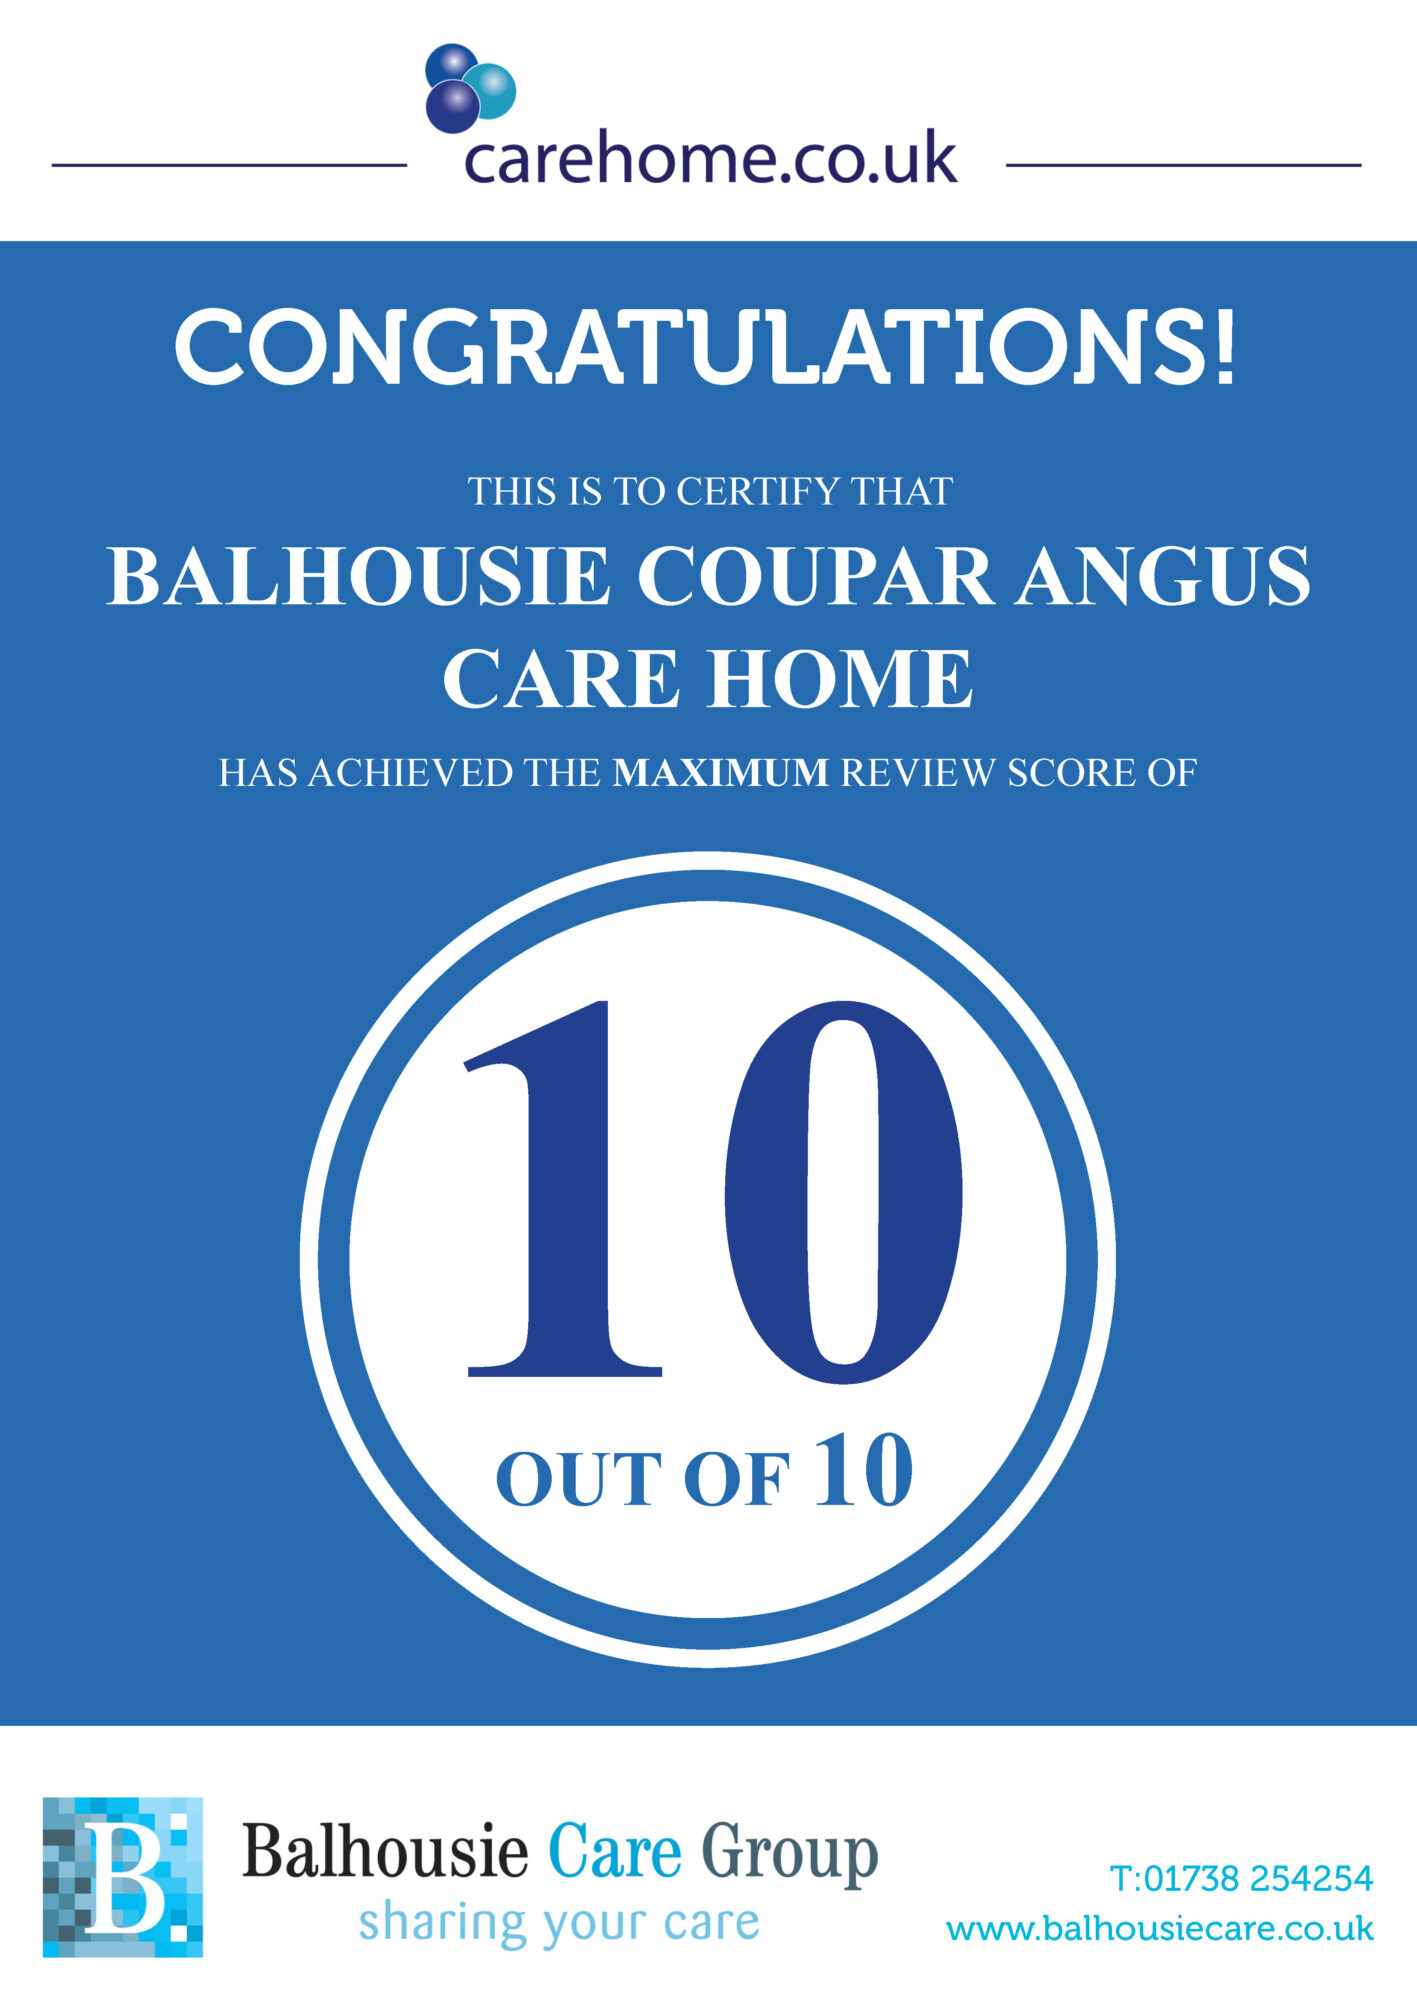 Balhousie Care Group - Carehome.co.uk 10 out of 10 eview Poster